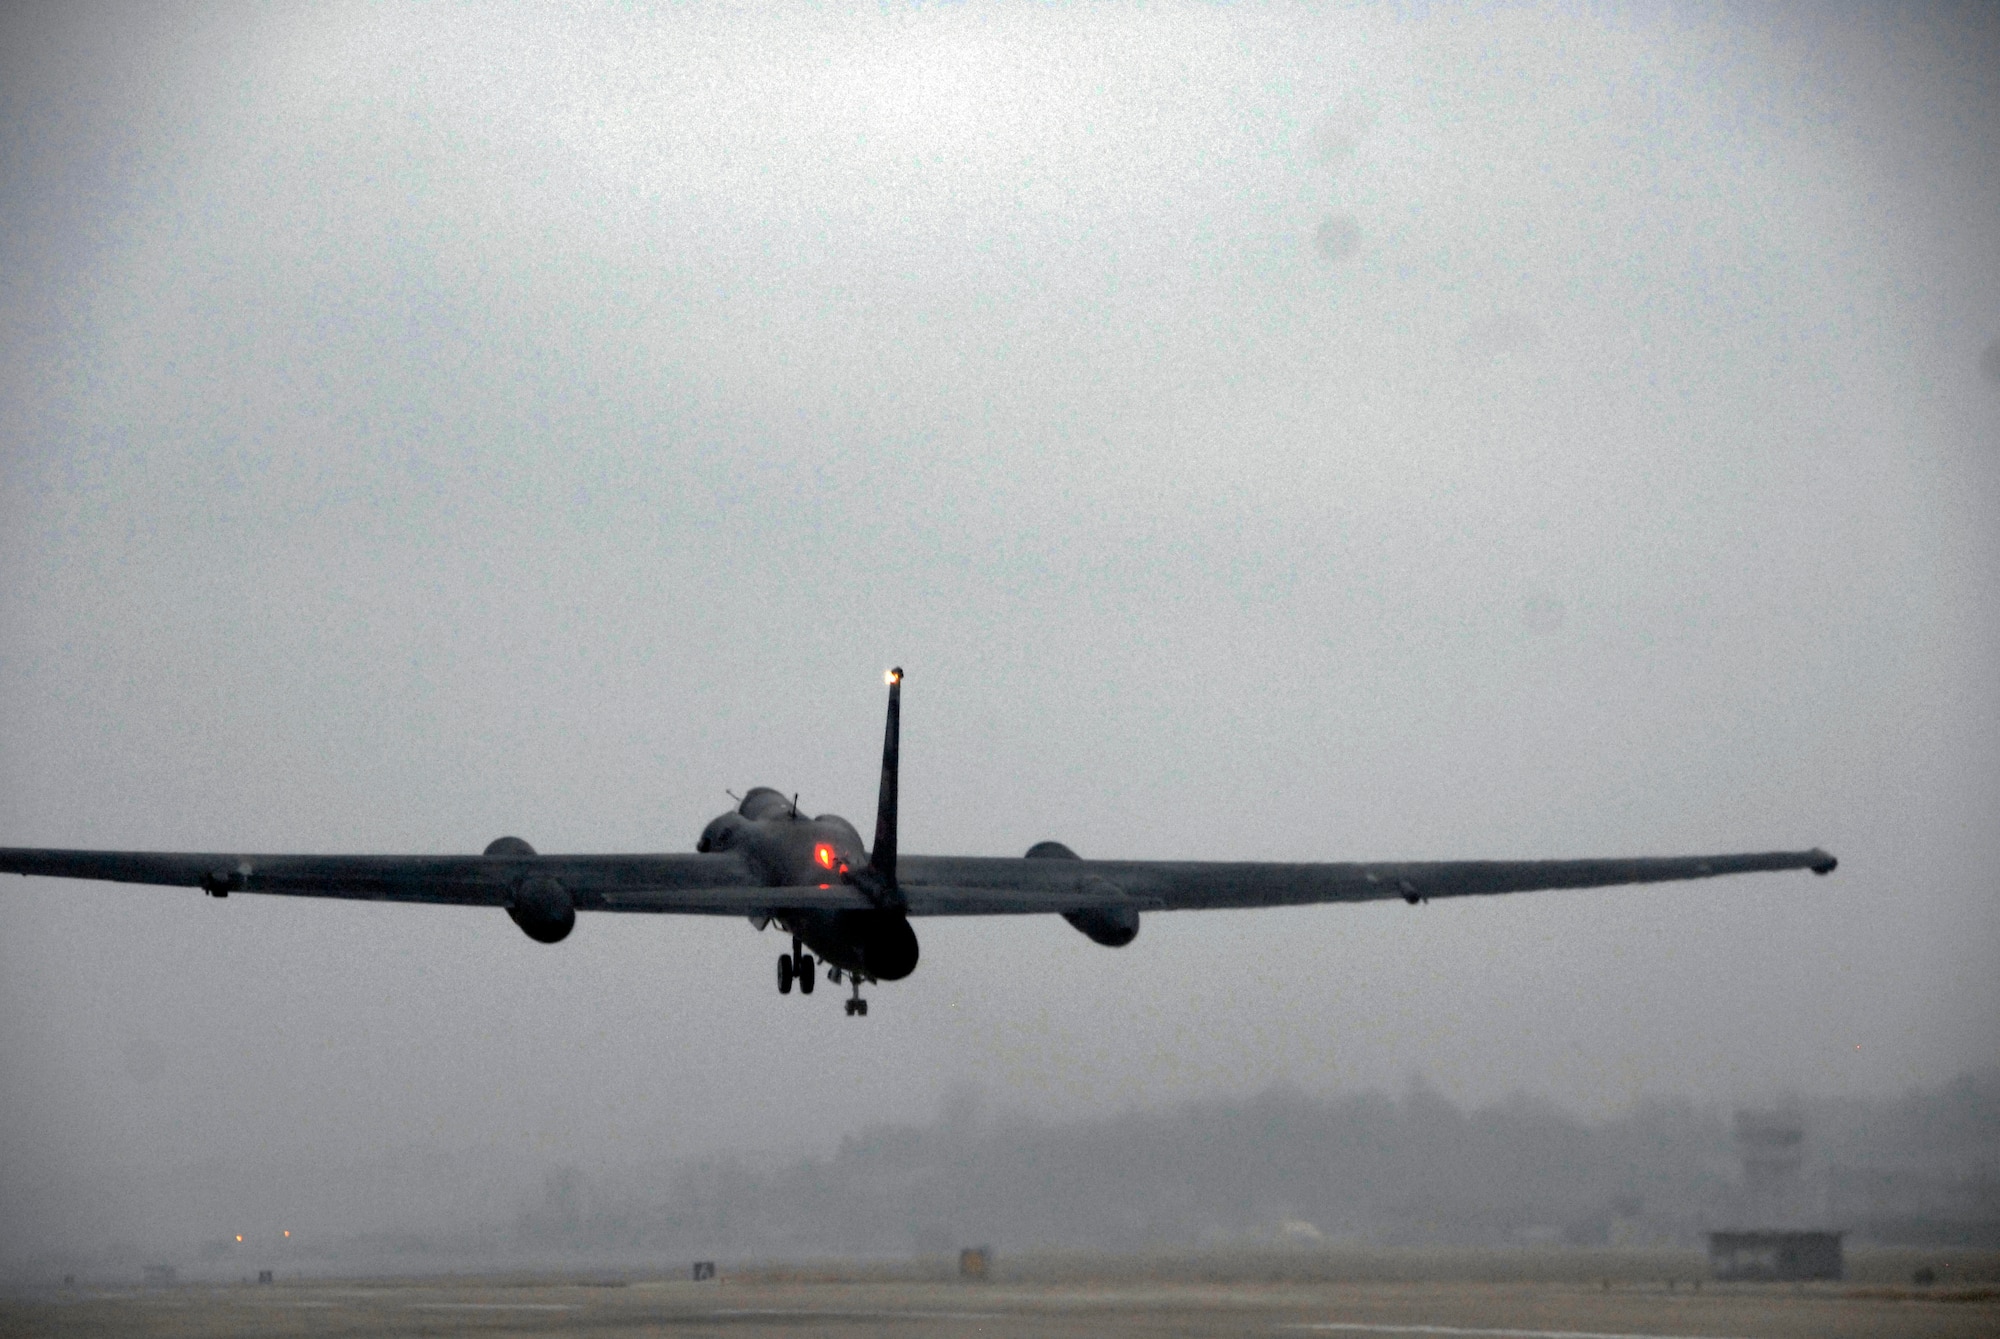 A U-2 "Dragonlady" departs on a mission from Osan Air Base, Republic of Korea, March 13. The U-2 flew a humanitarian mission to capture imagery of the earthquake- and tsunami-affected areas of Japan. (U.S. Air Force photo by Senior Master Sgt. Paul Holcomb)